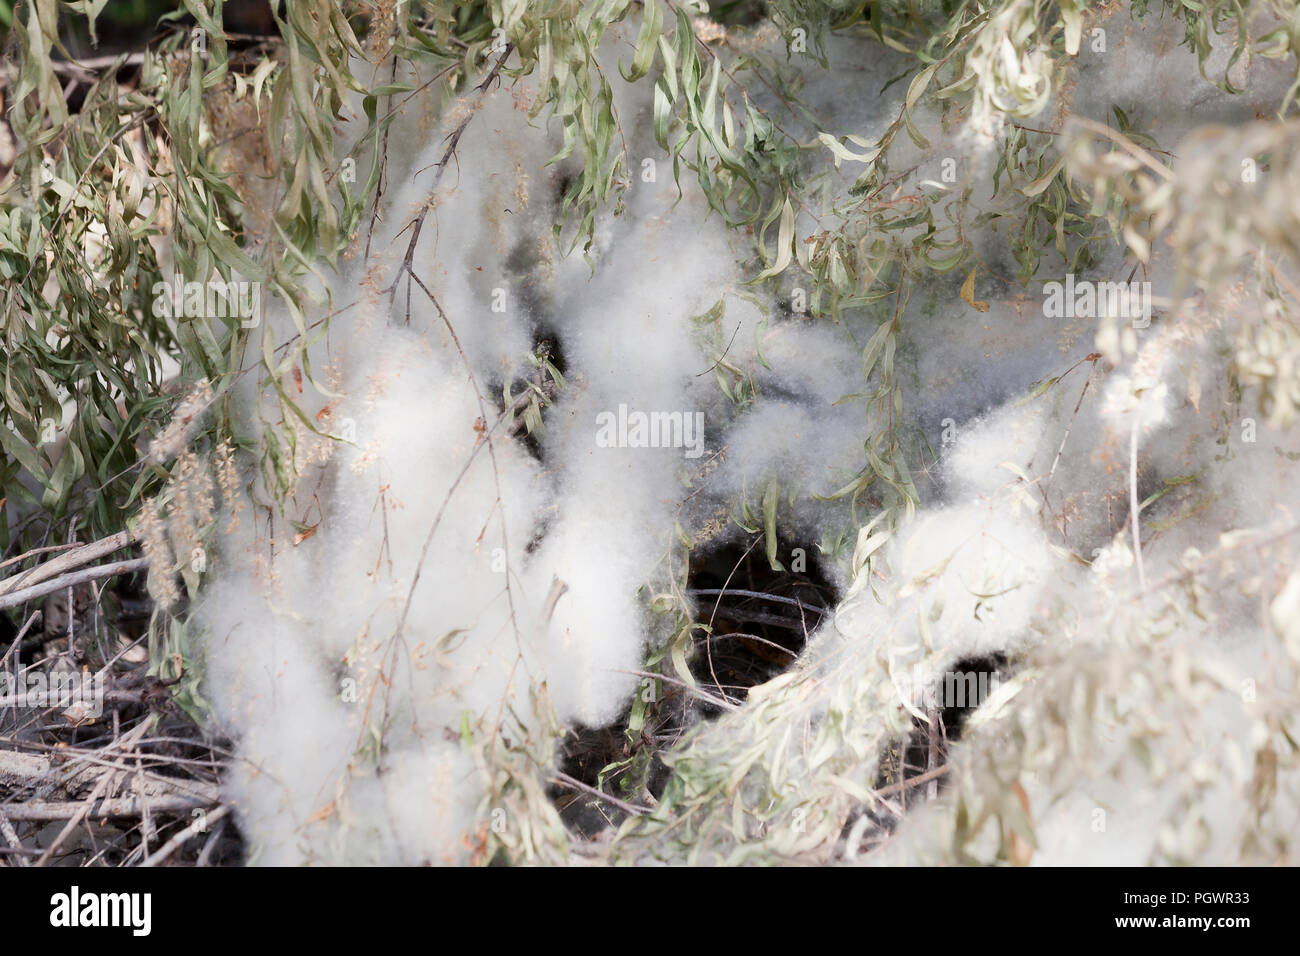 Fallen cotton-like seeds of the Black willow tree (Salix nigra) covering nearby plants - California USA Stock Photo